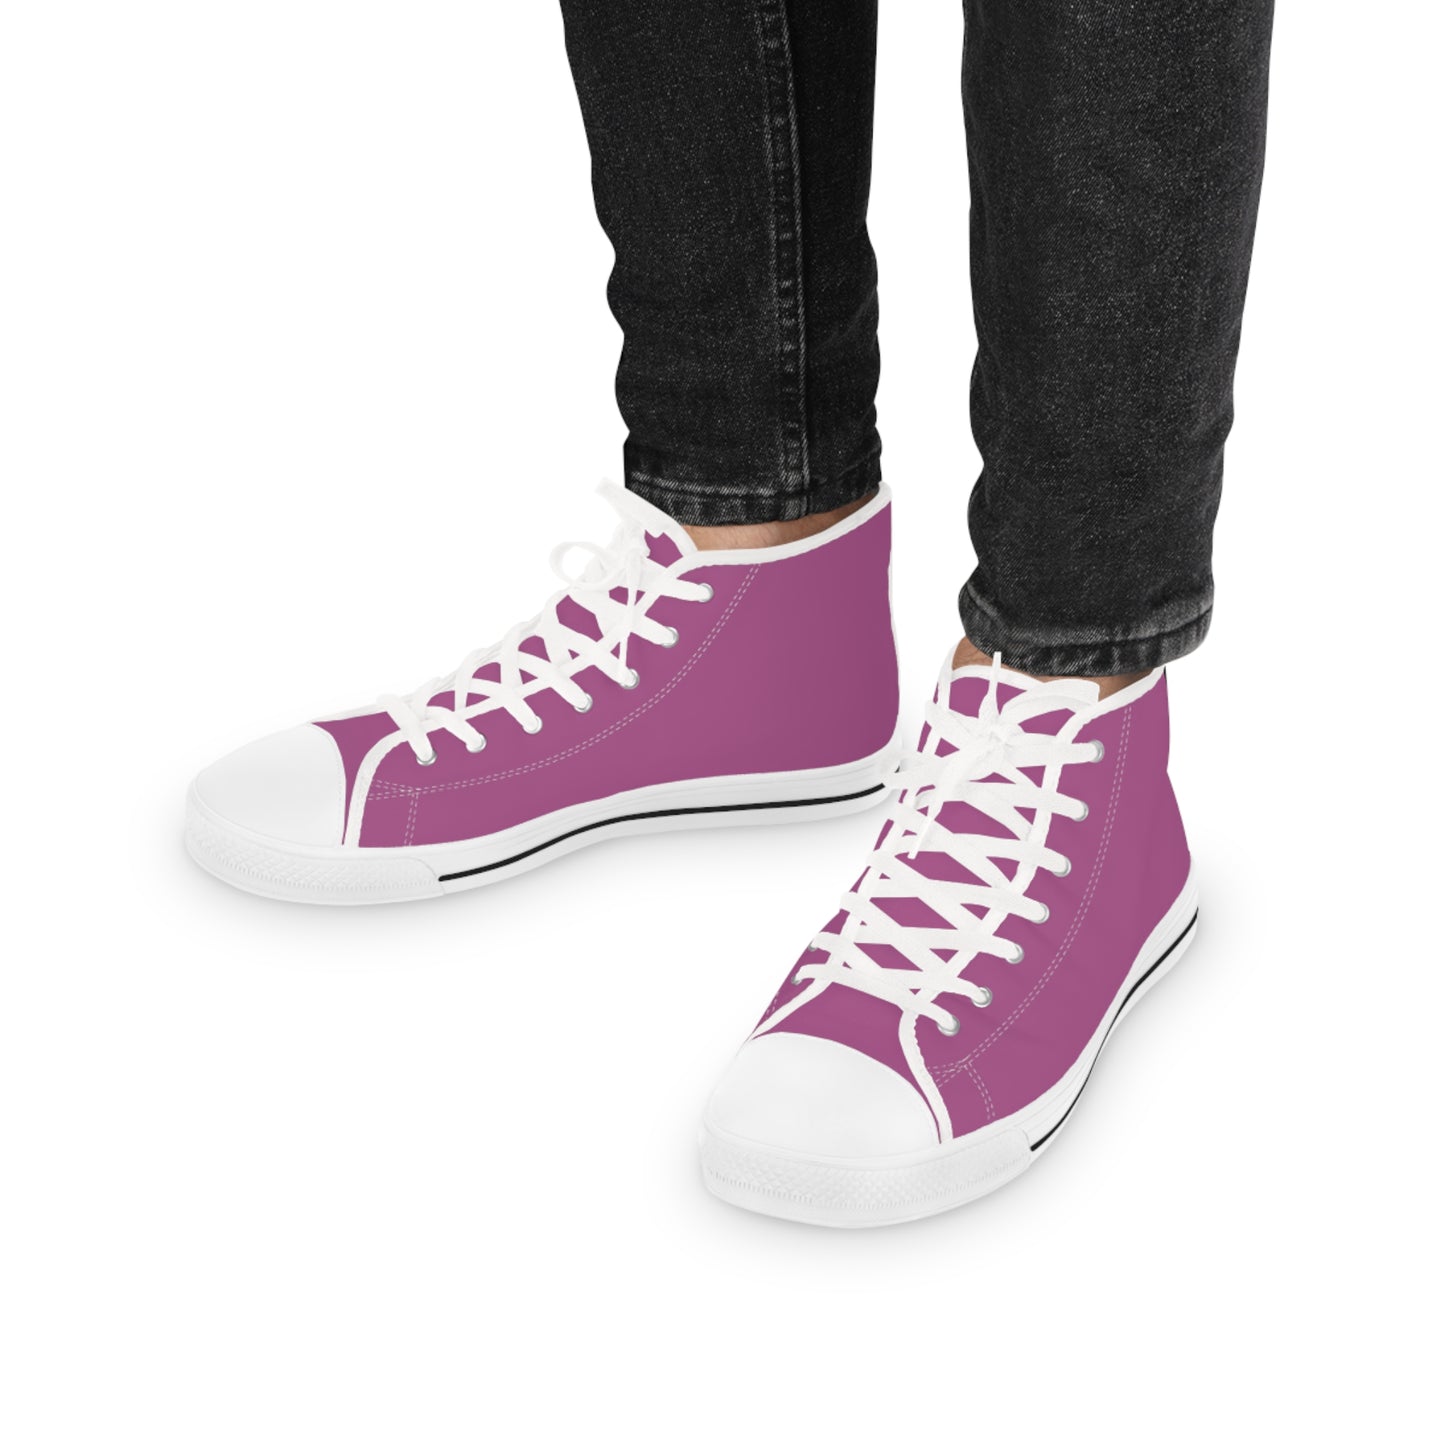 Men's Canvas High Top Solid Color Sneakers - Candy Wrapper Pink US 14 White sole